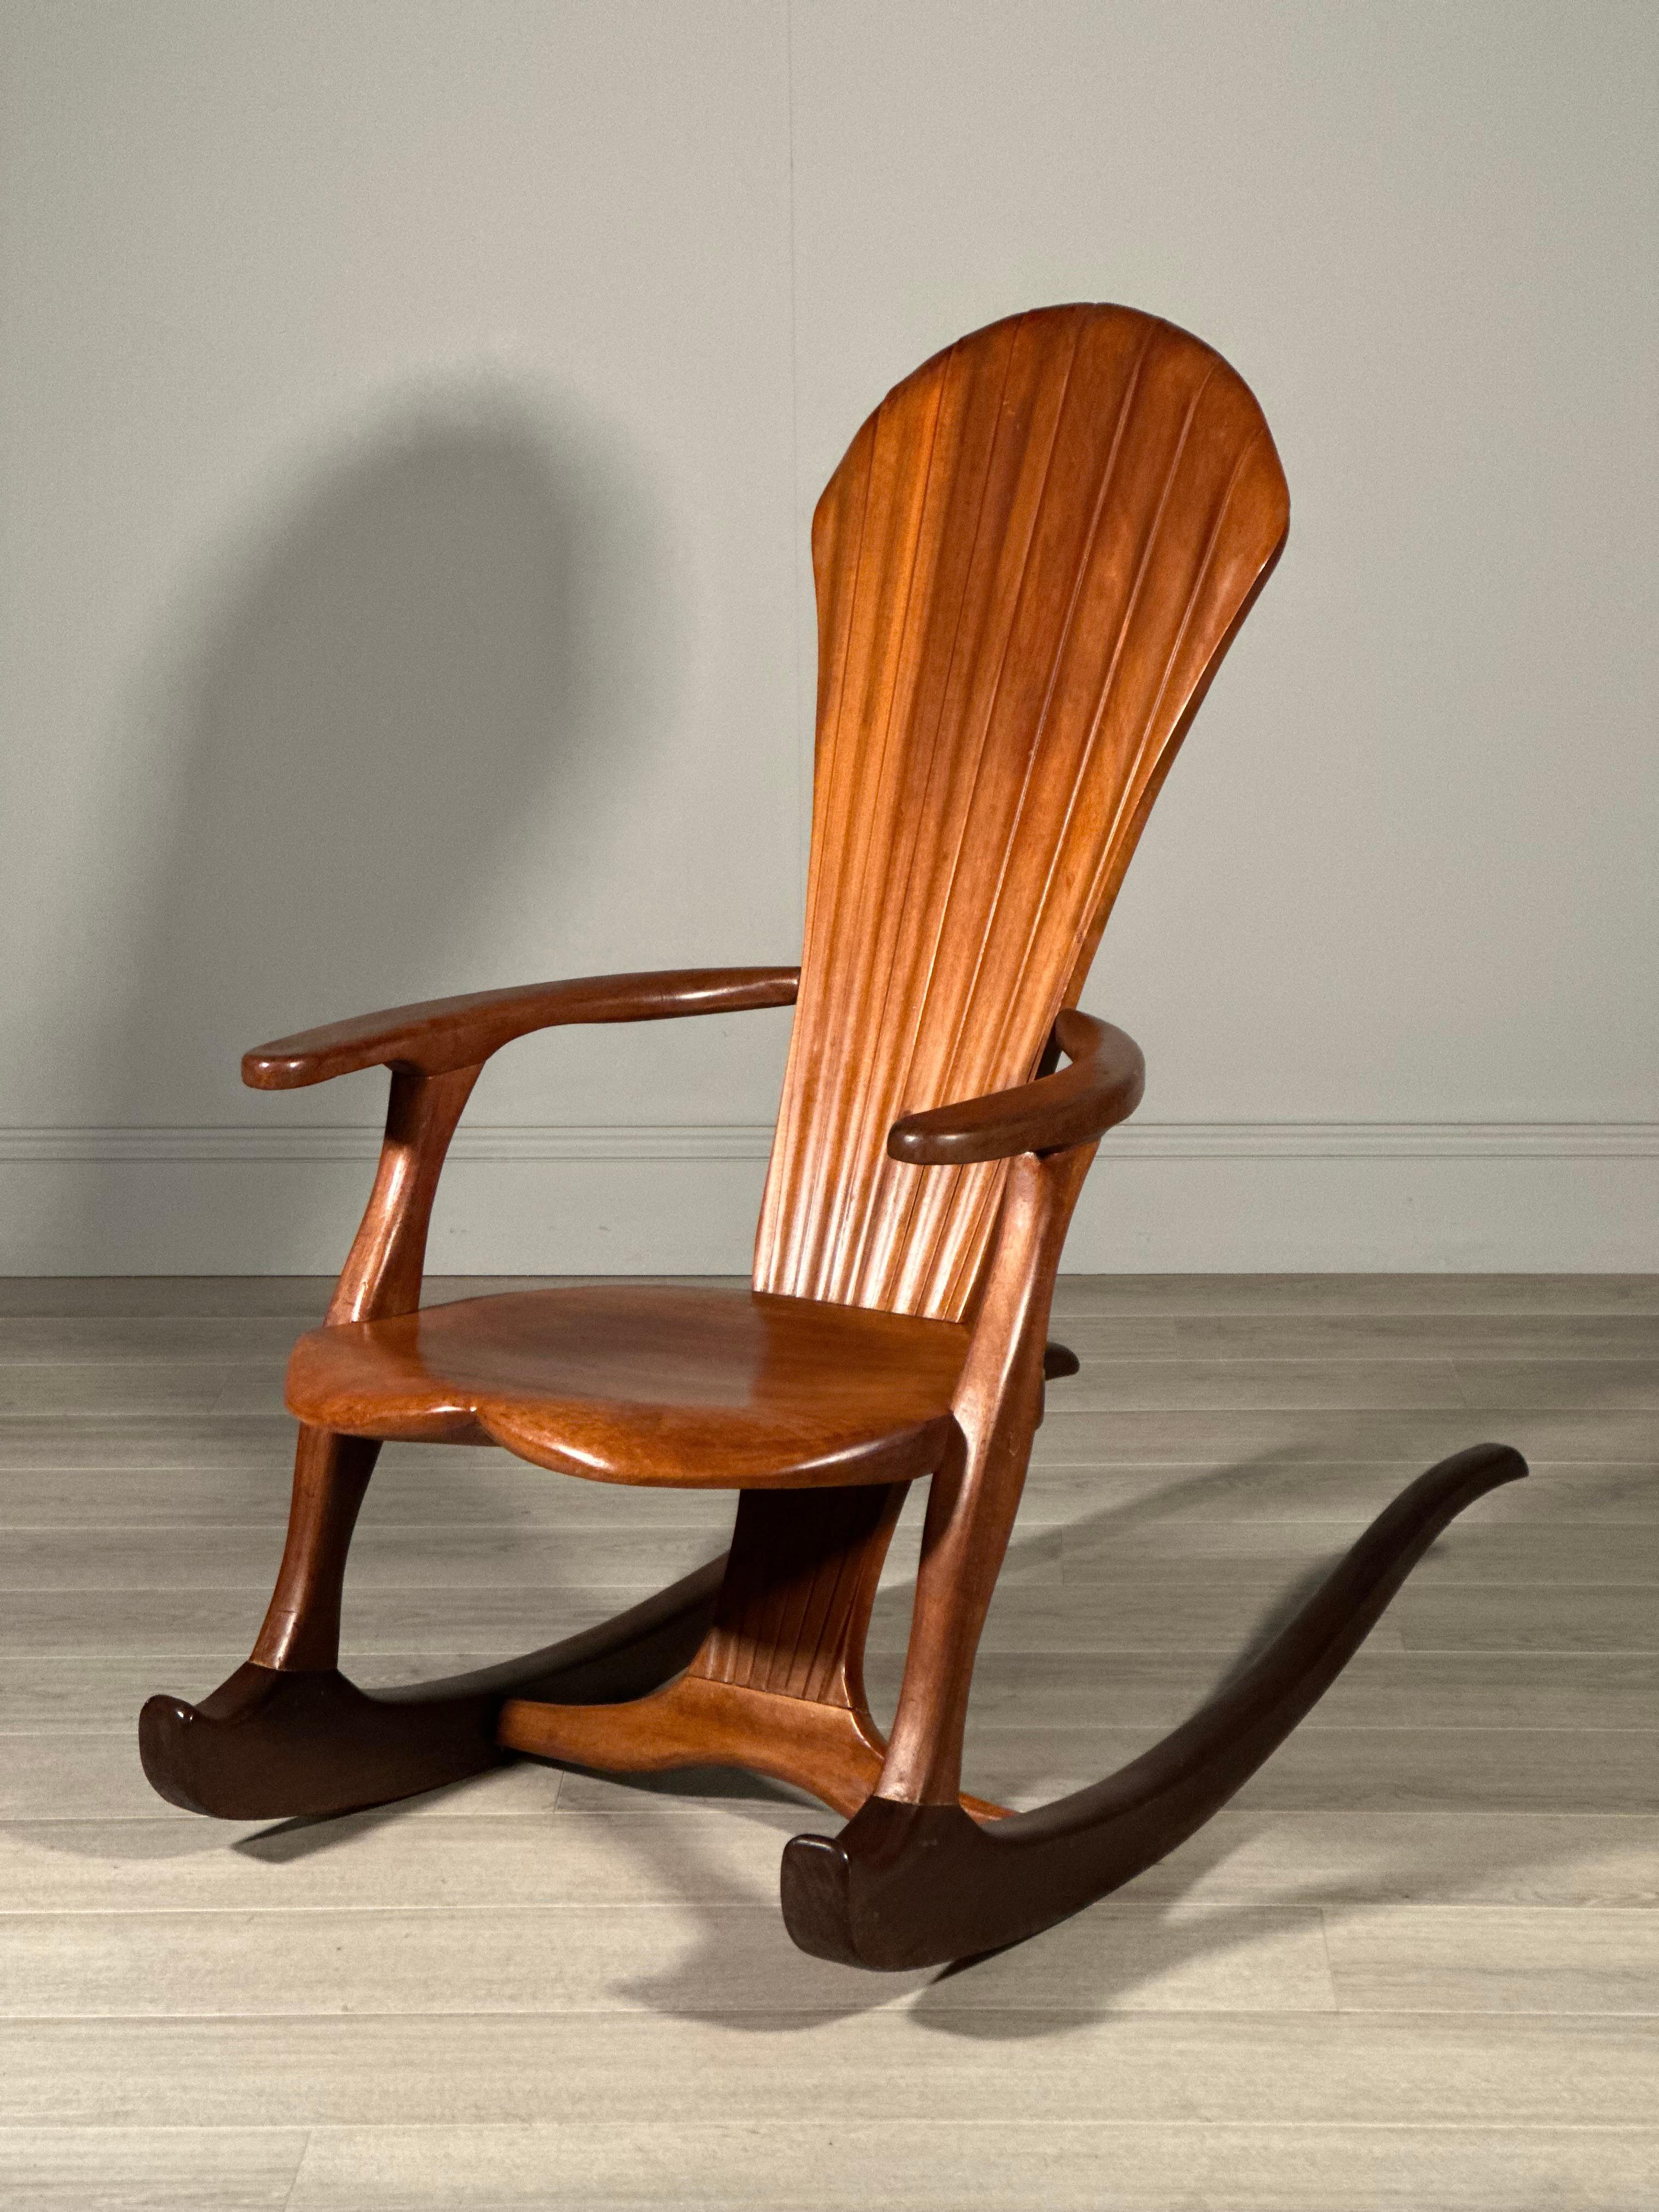 A large American rocking chair dating to the 1950’s. The rocker is made from solid cherry wood, large in size and has a superb style to it with a high shell back, curved arm rest, love heart shape seat and long tailing rockers. In fantastic original